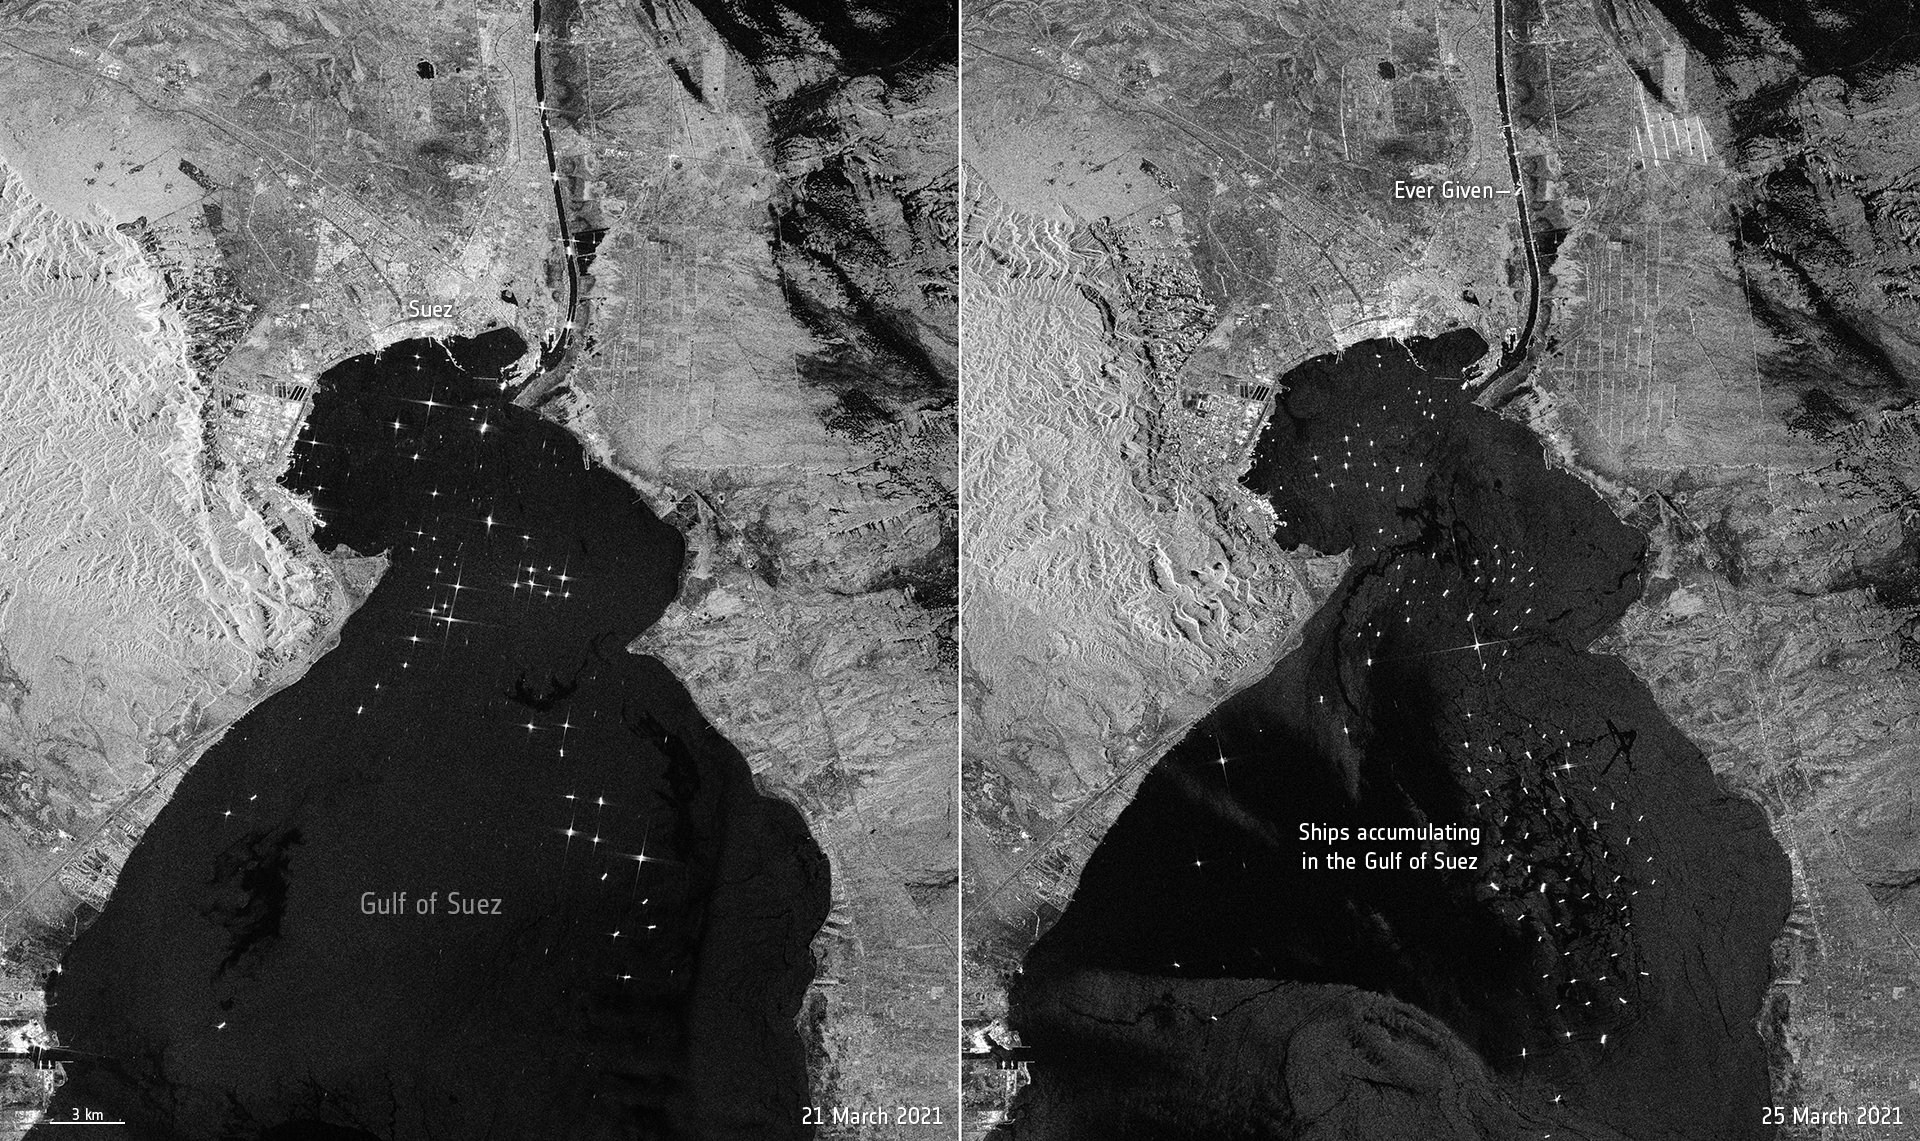 The Suez Canal remains blocked due to efforts to free the blocked ship